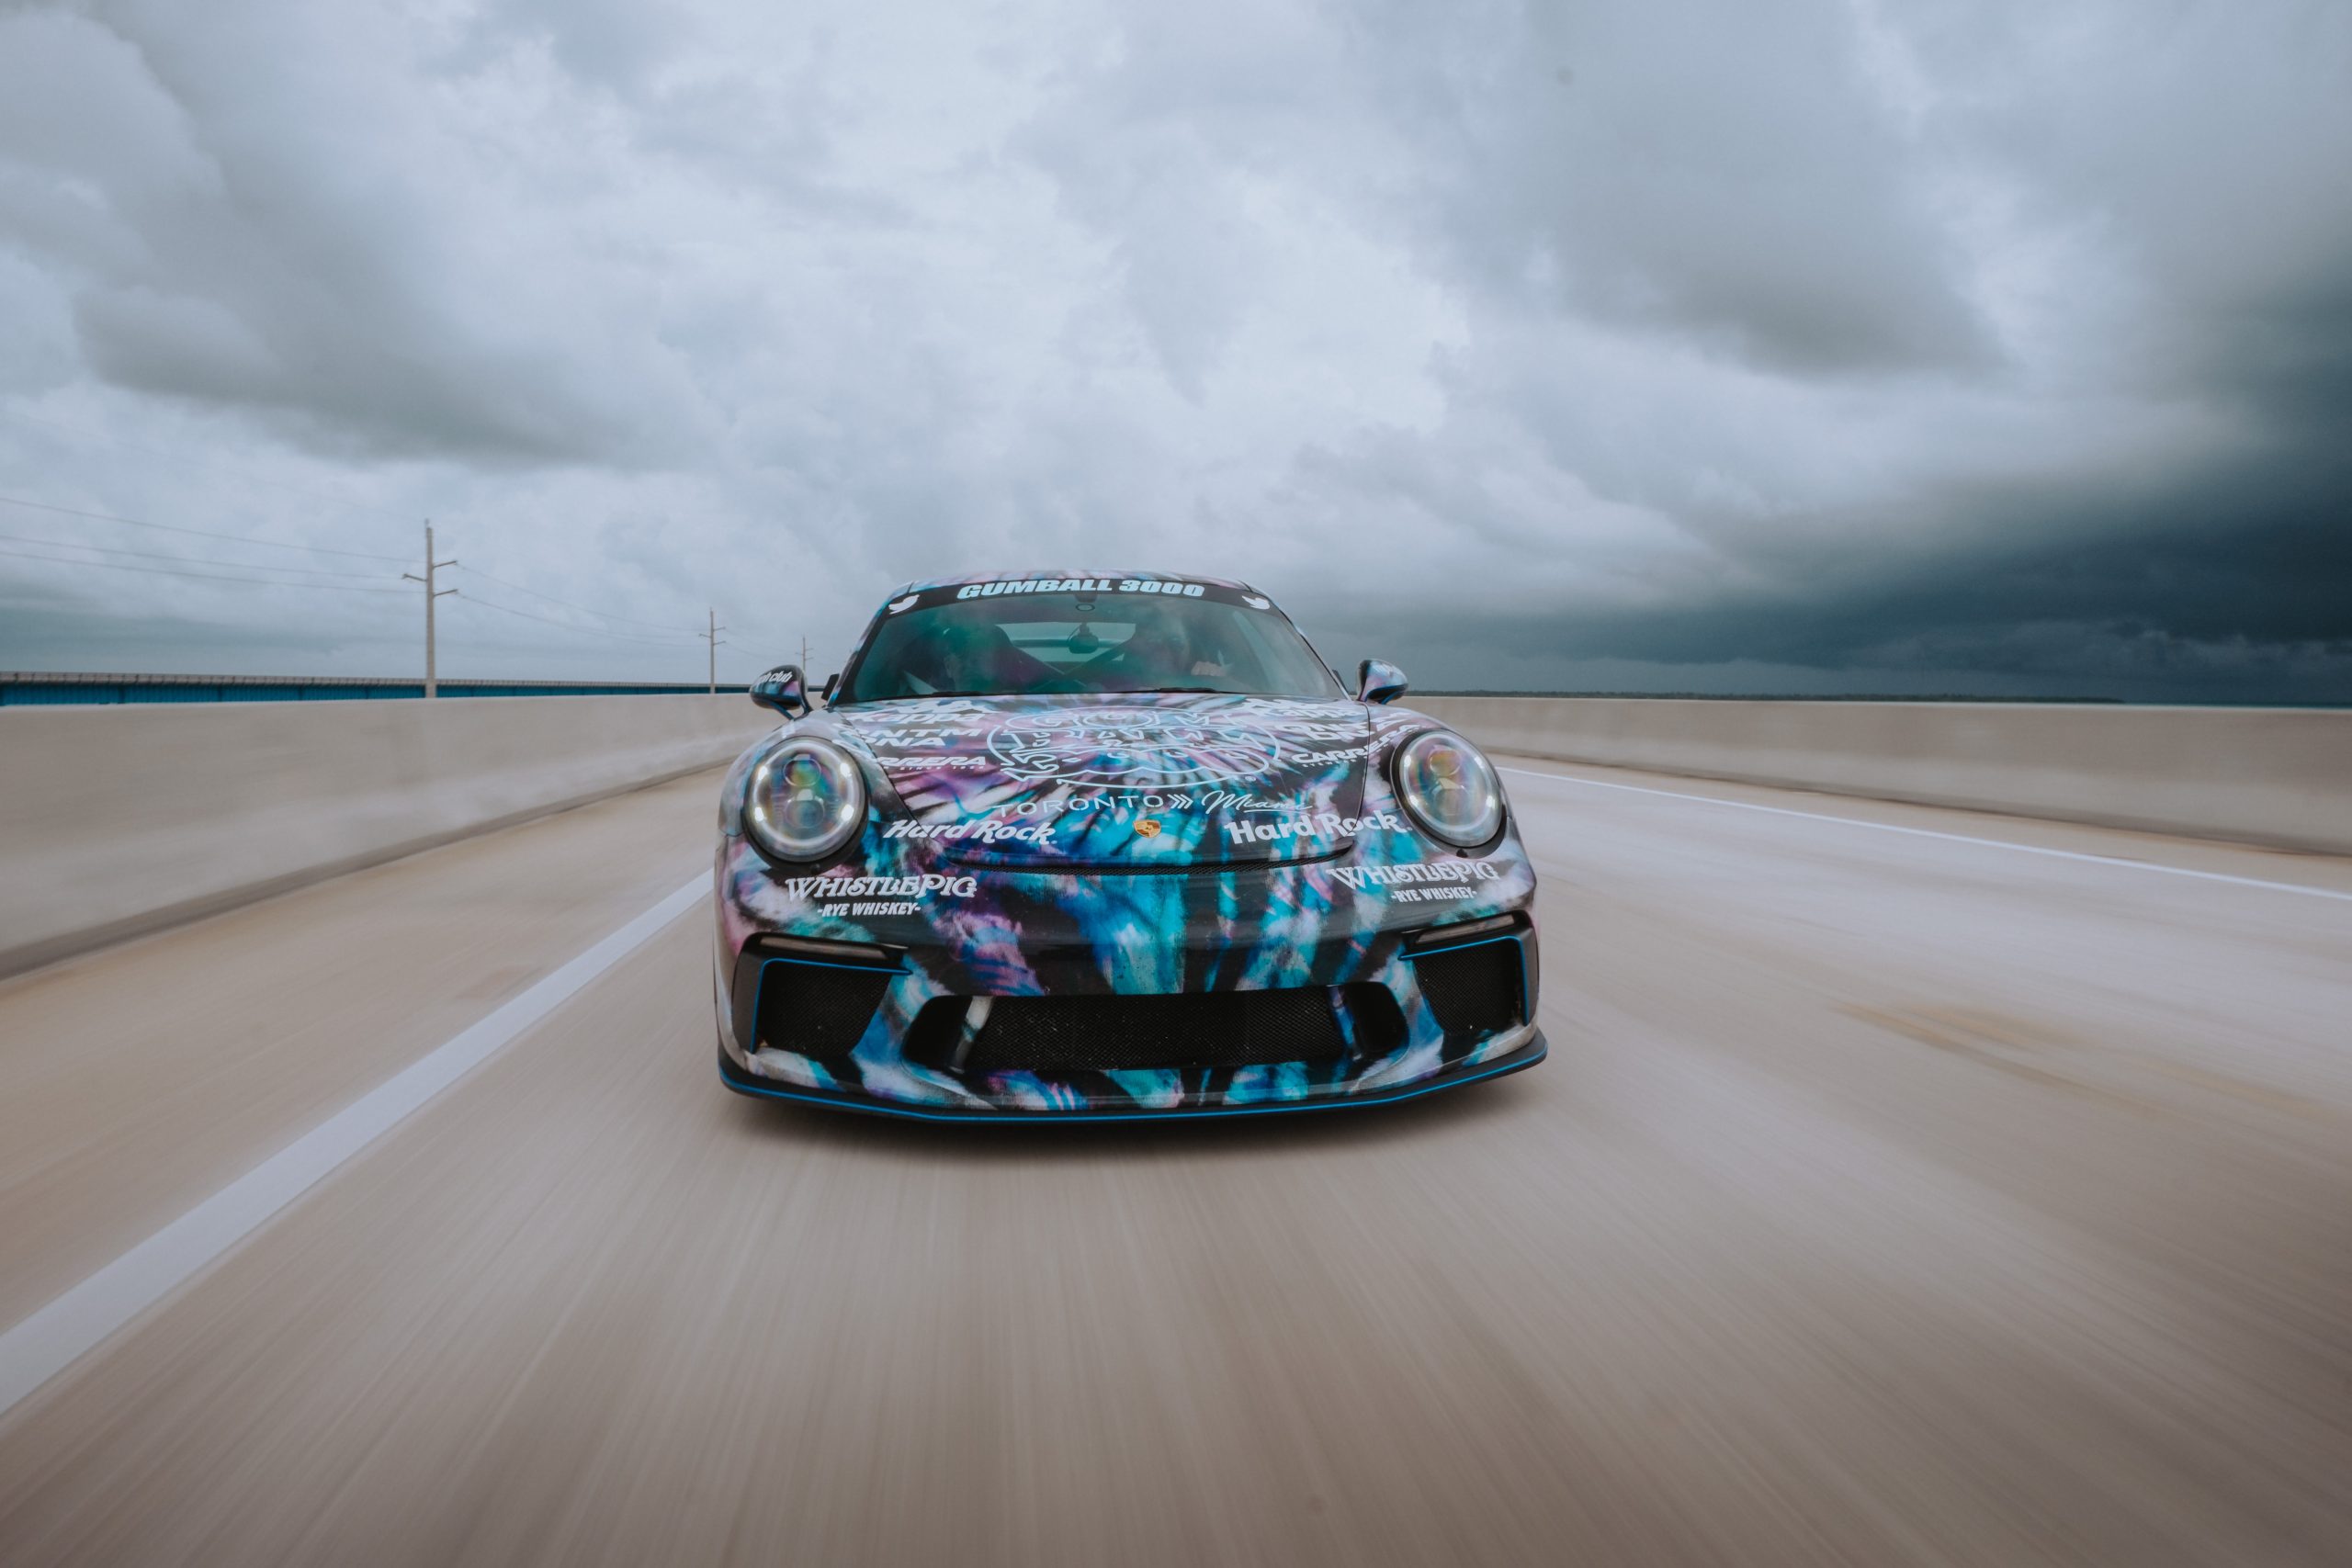 Gumball 3000 2022 in Miami